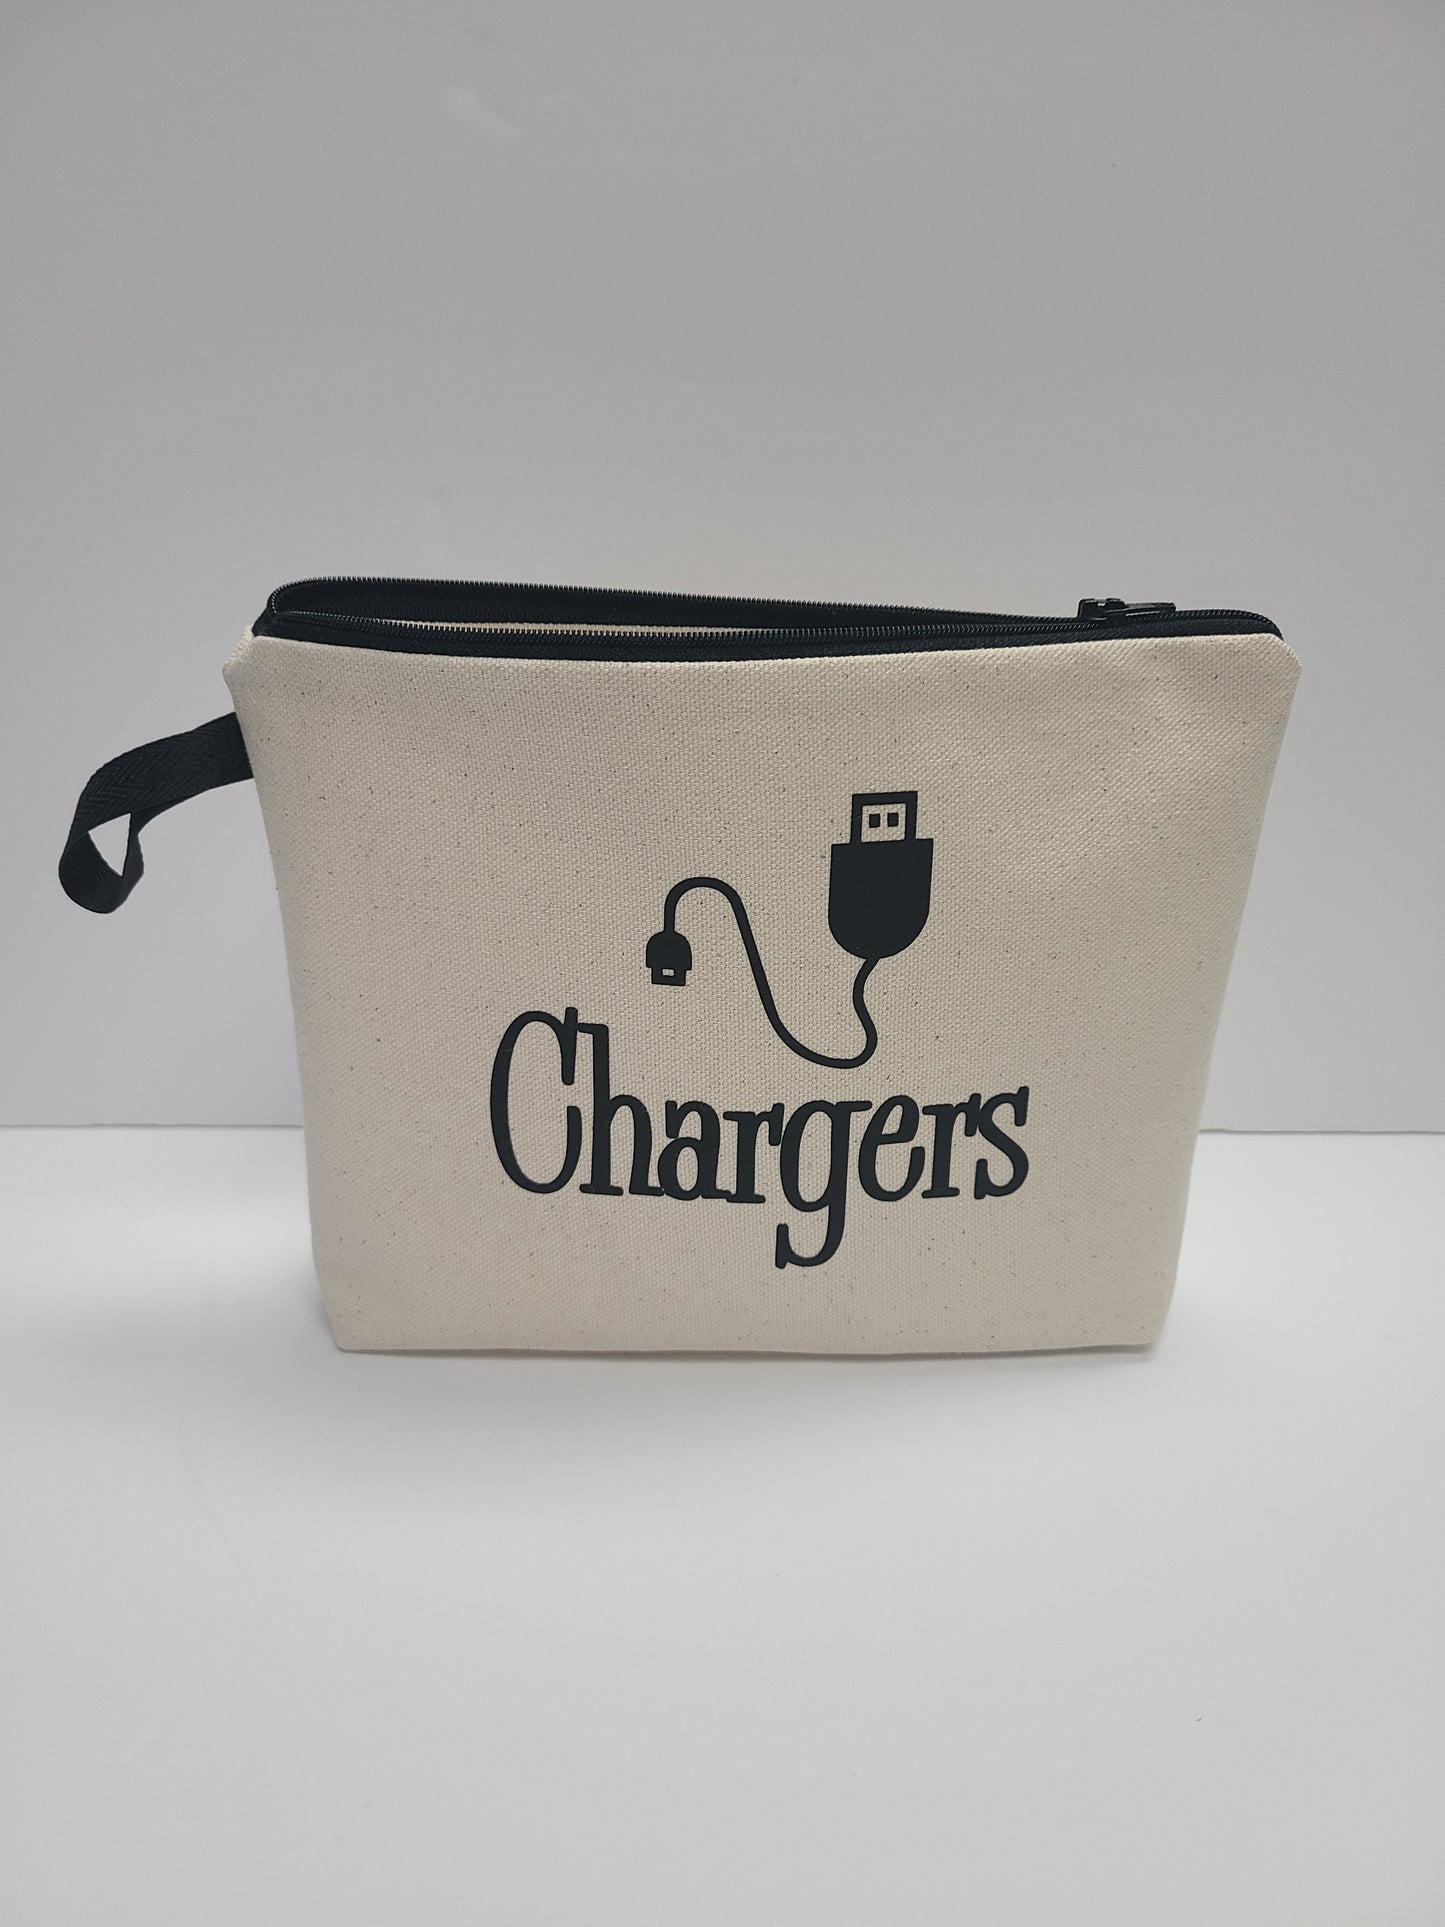 Chargers small Travel Bag